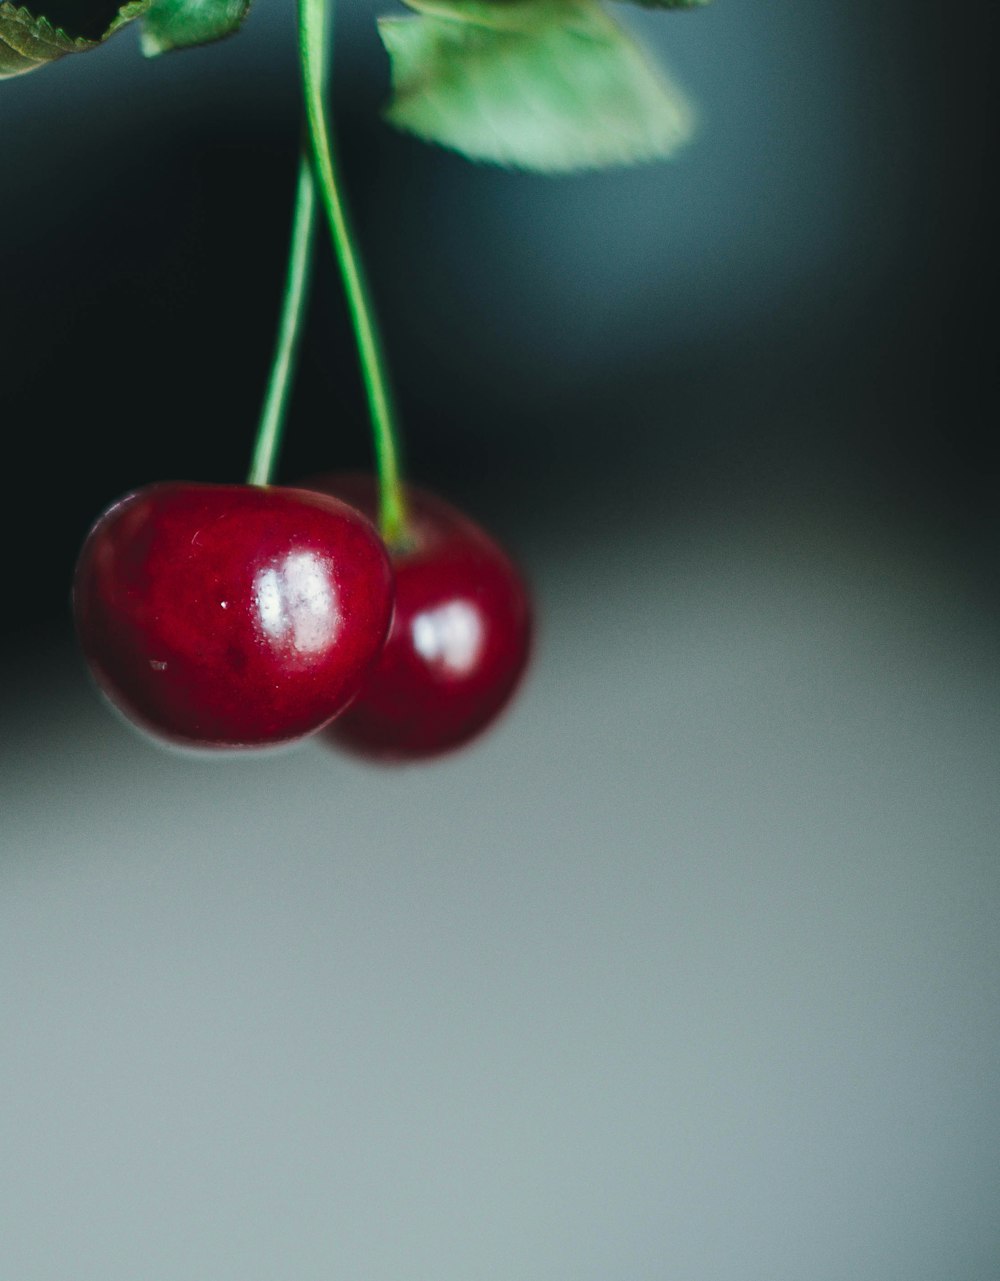 red cherry fruit on white surface